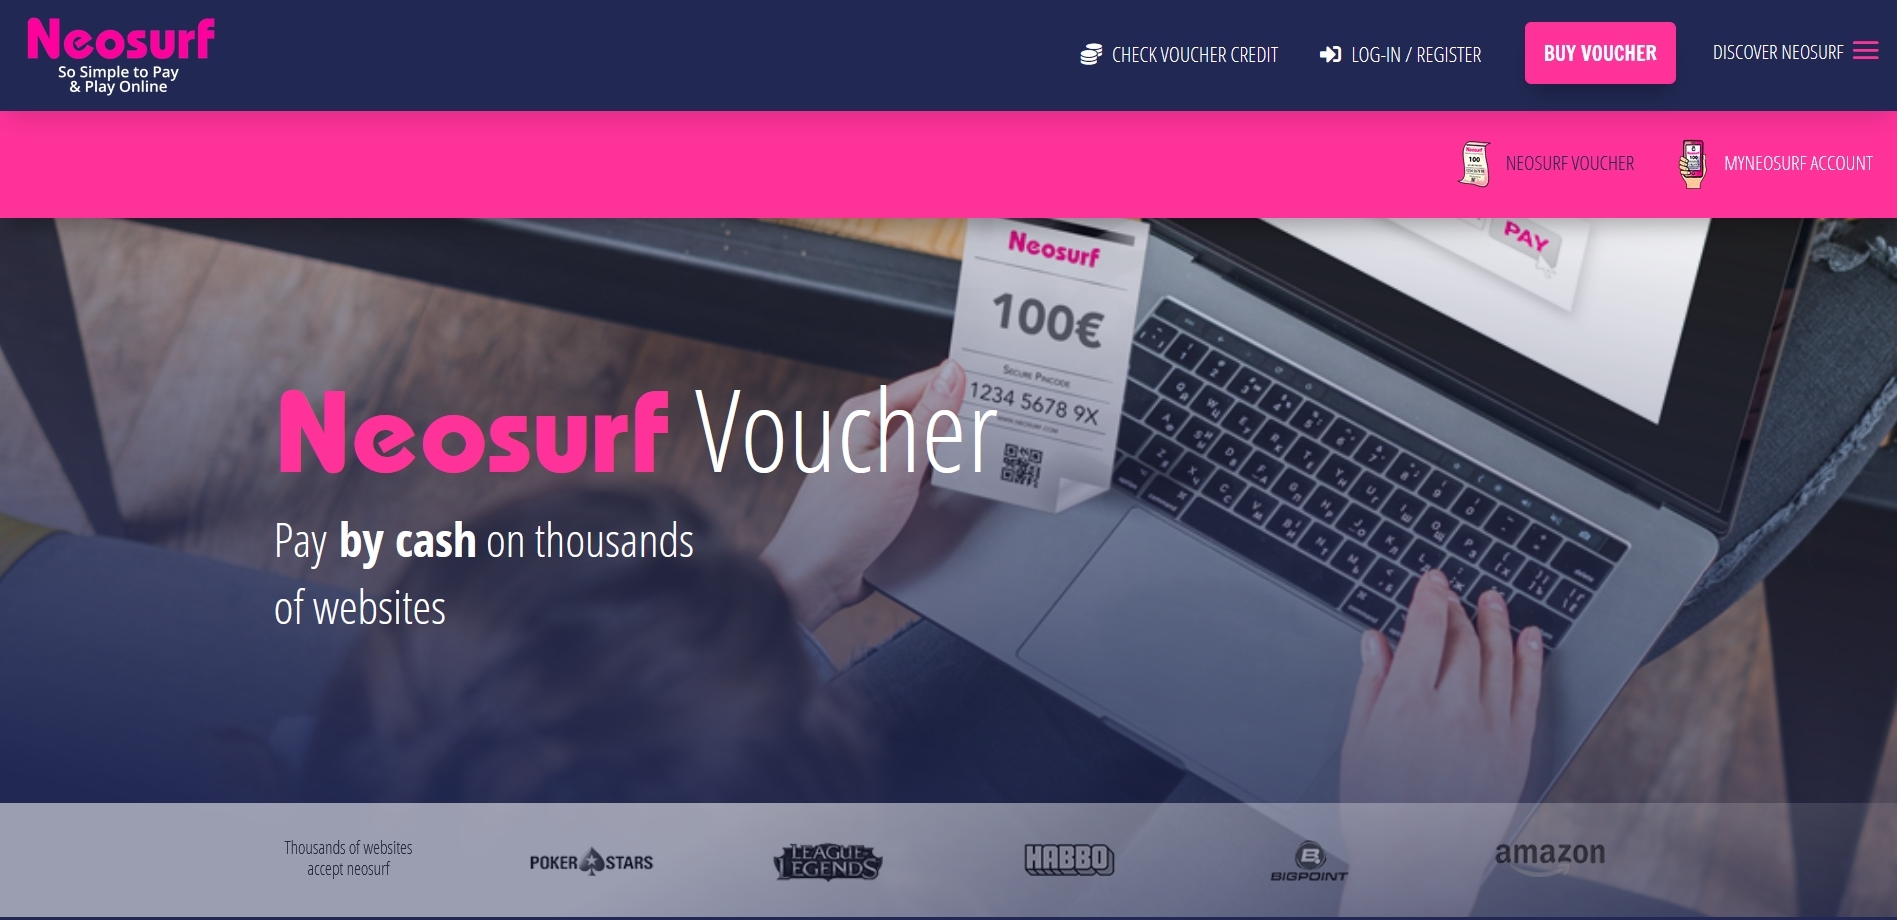 Neosurf €30 Gift Card BE, 36.22 usd